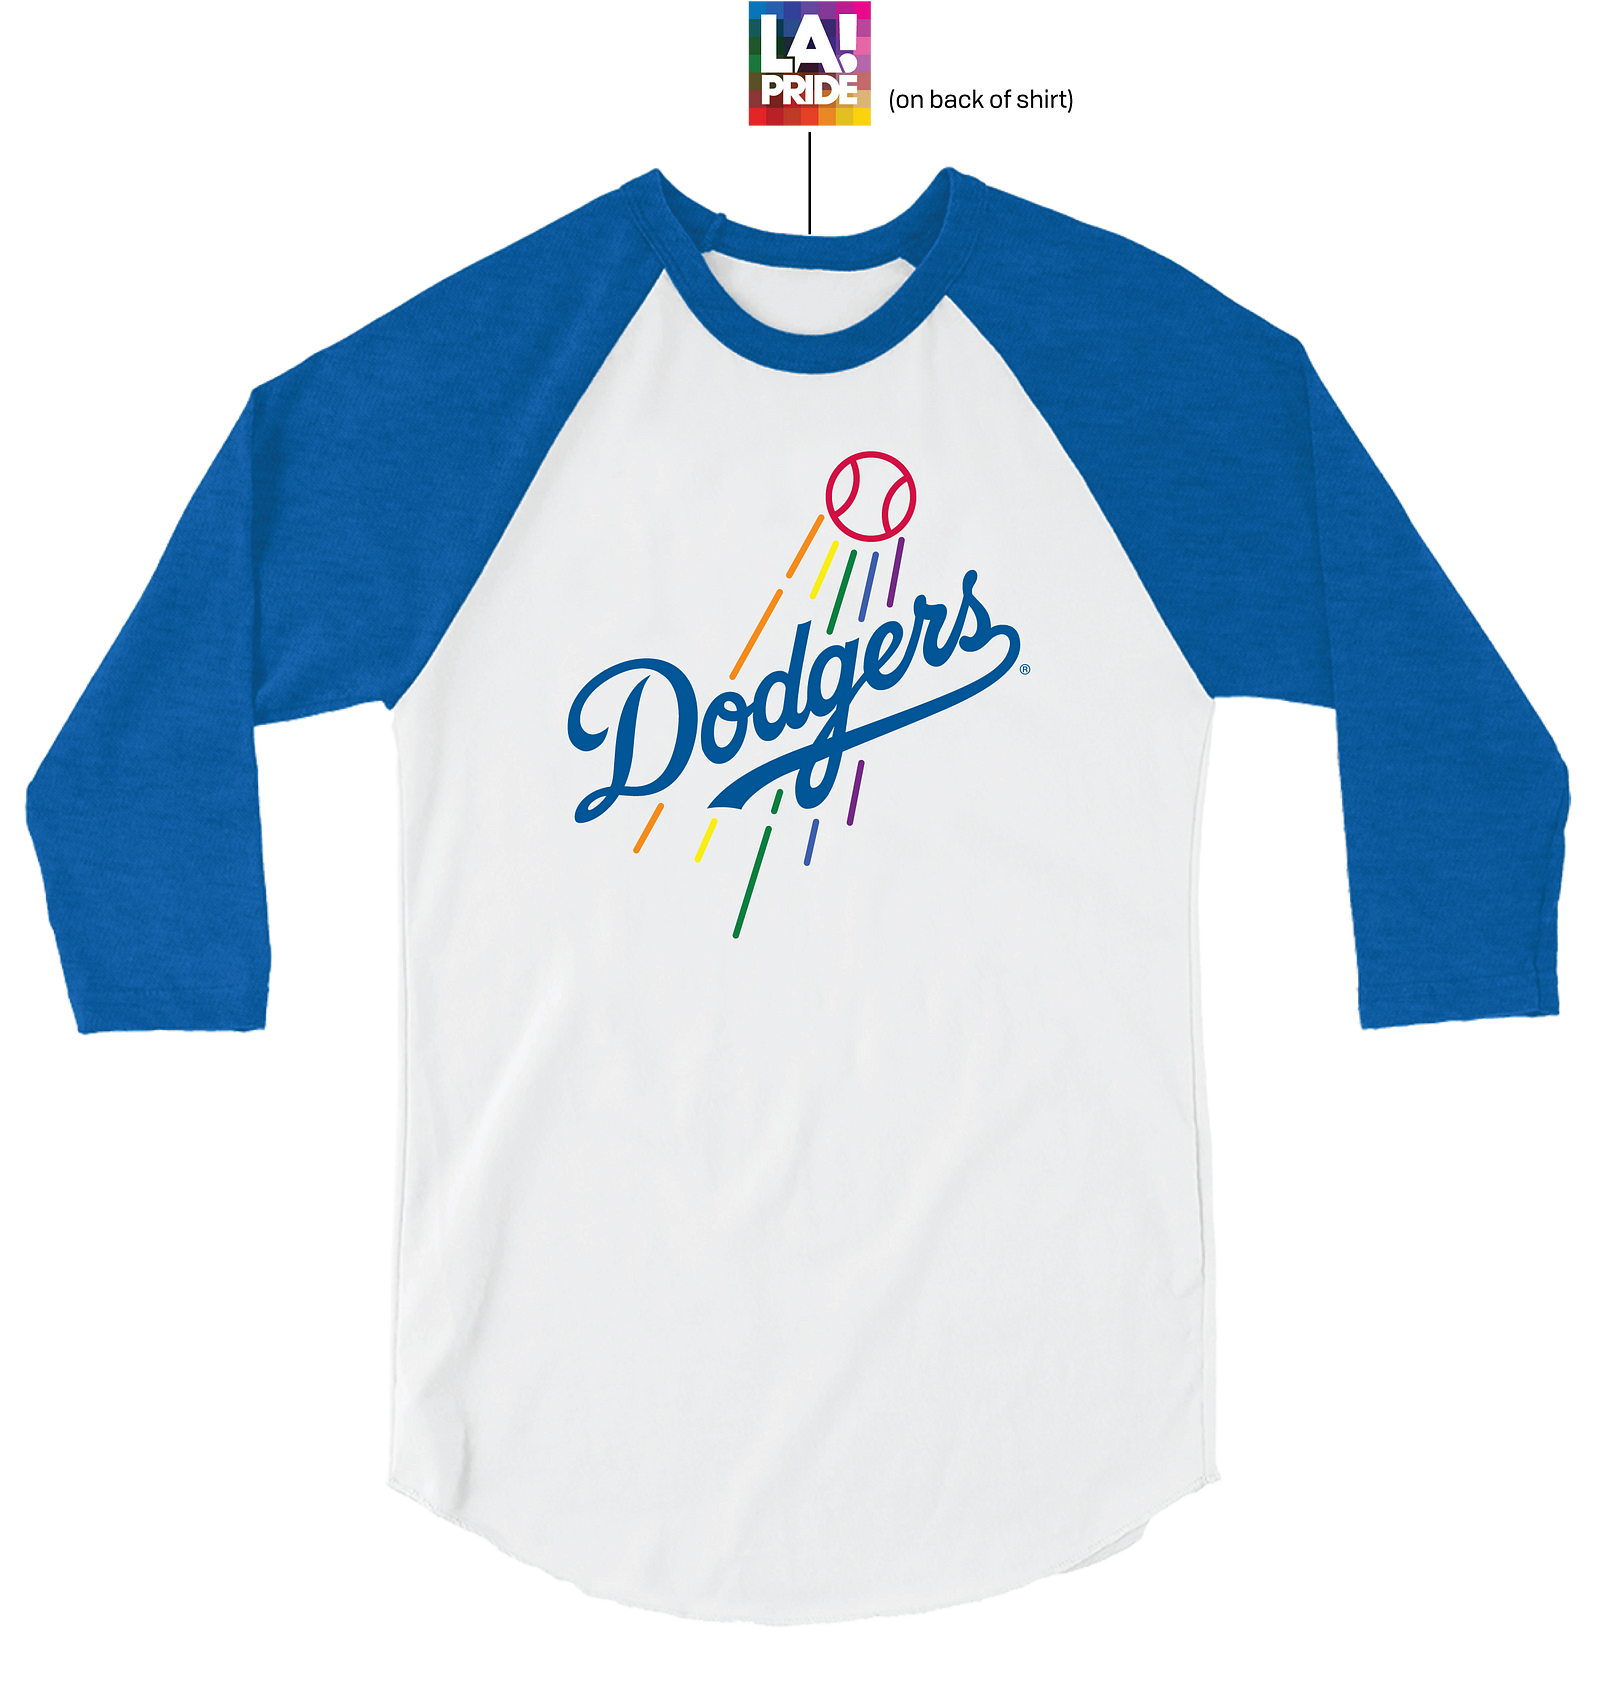 where to buy dodger shirts